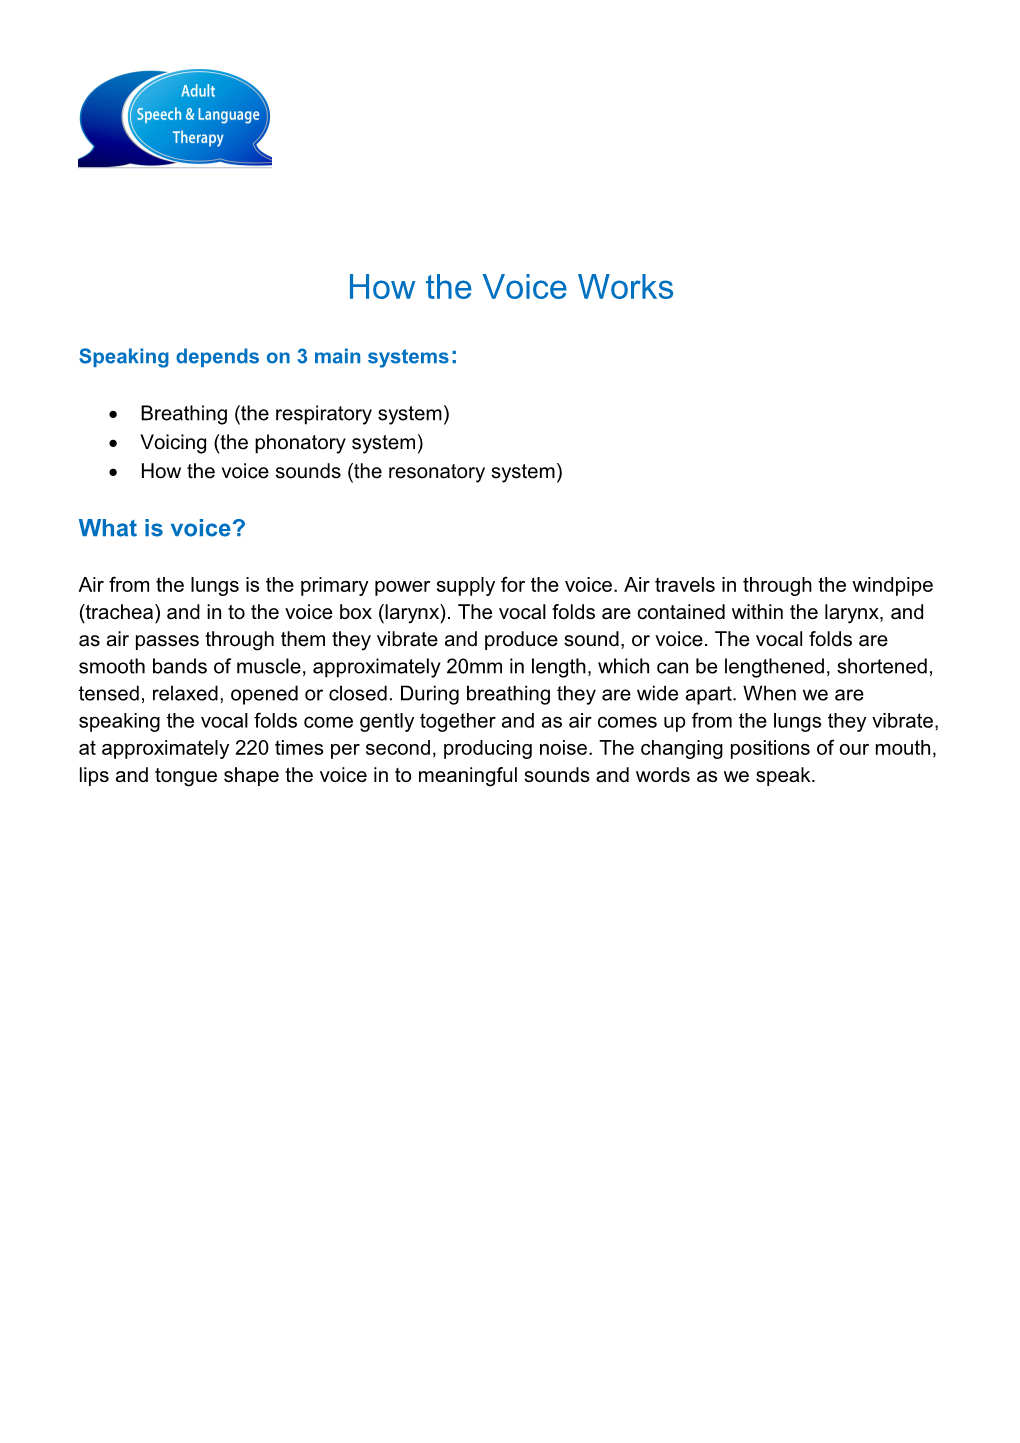 How the Voice Works